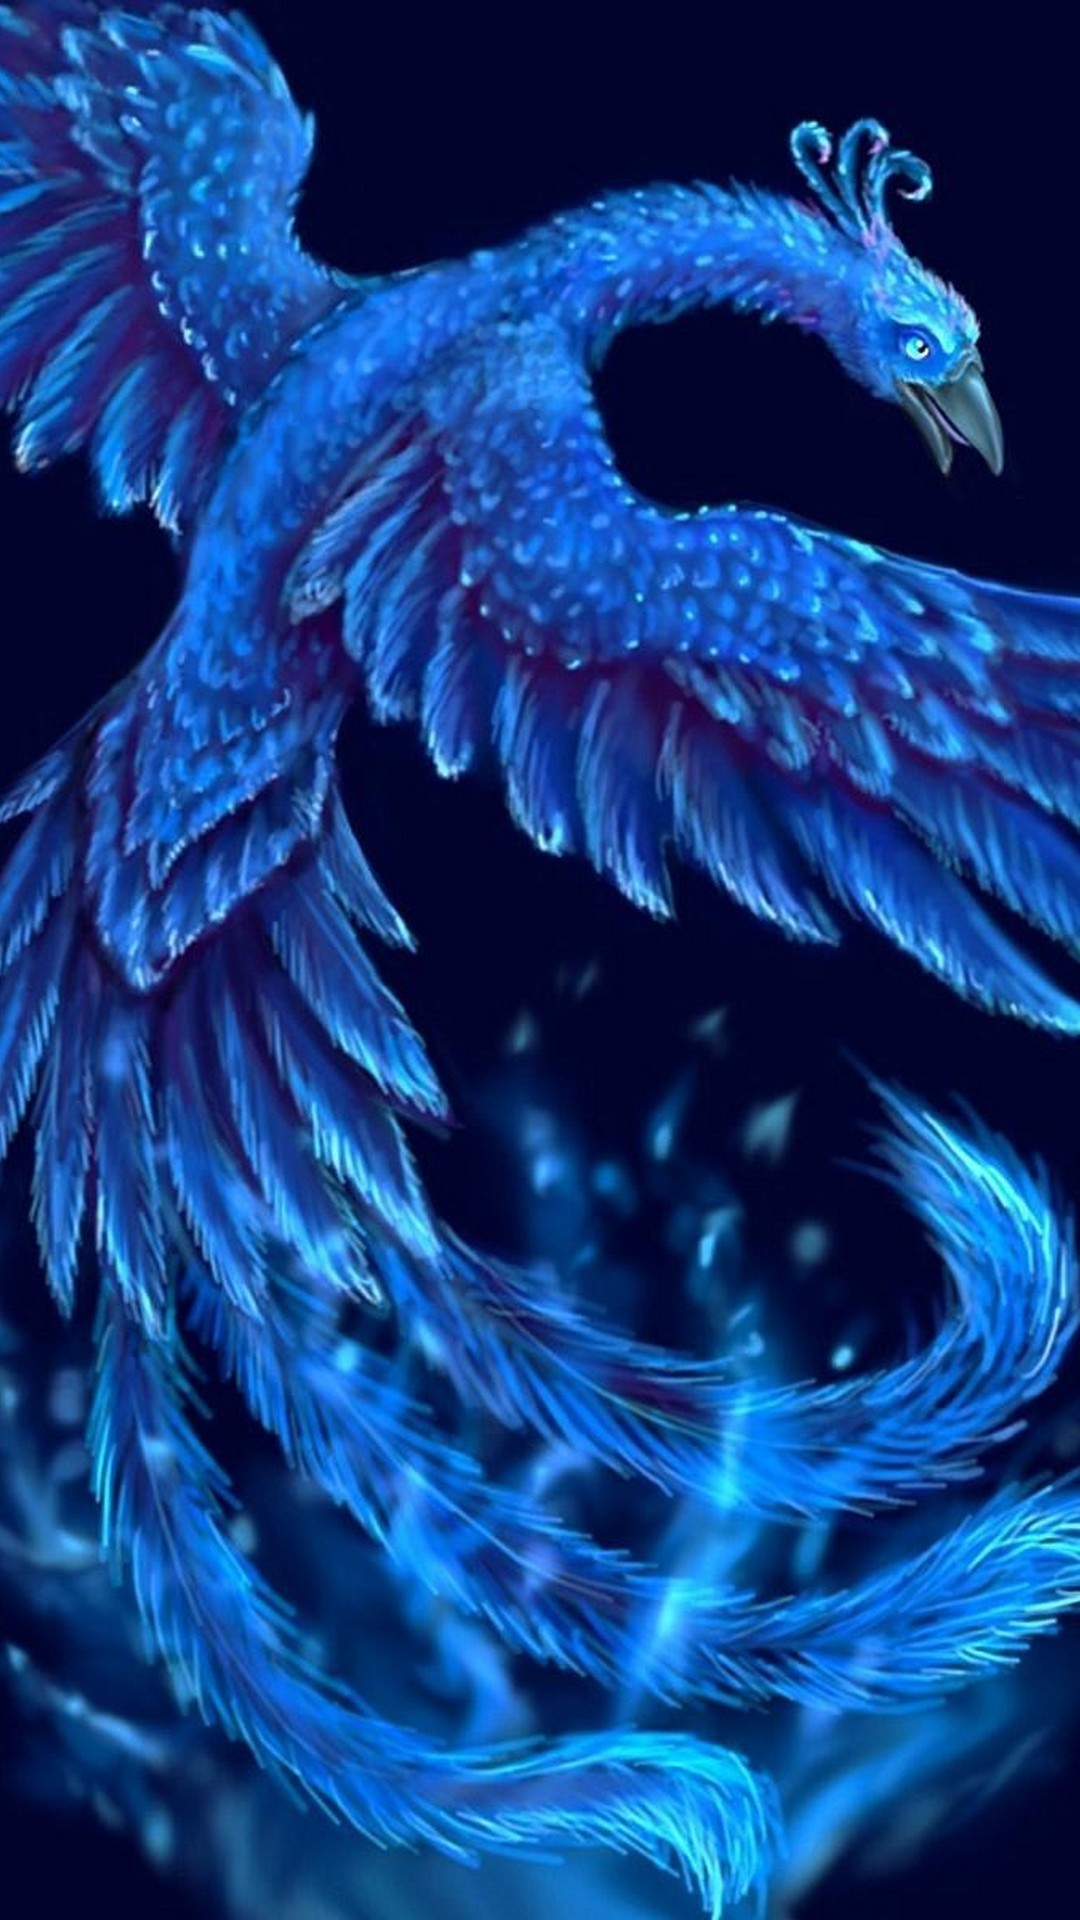 1080x1920 Ice Phoenix Wallpaper iPhone with image resolution  pixel. You can  make this wallpaper for